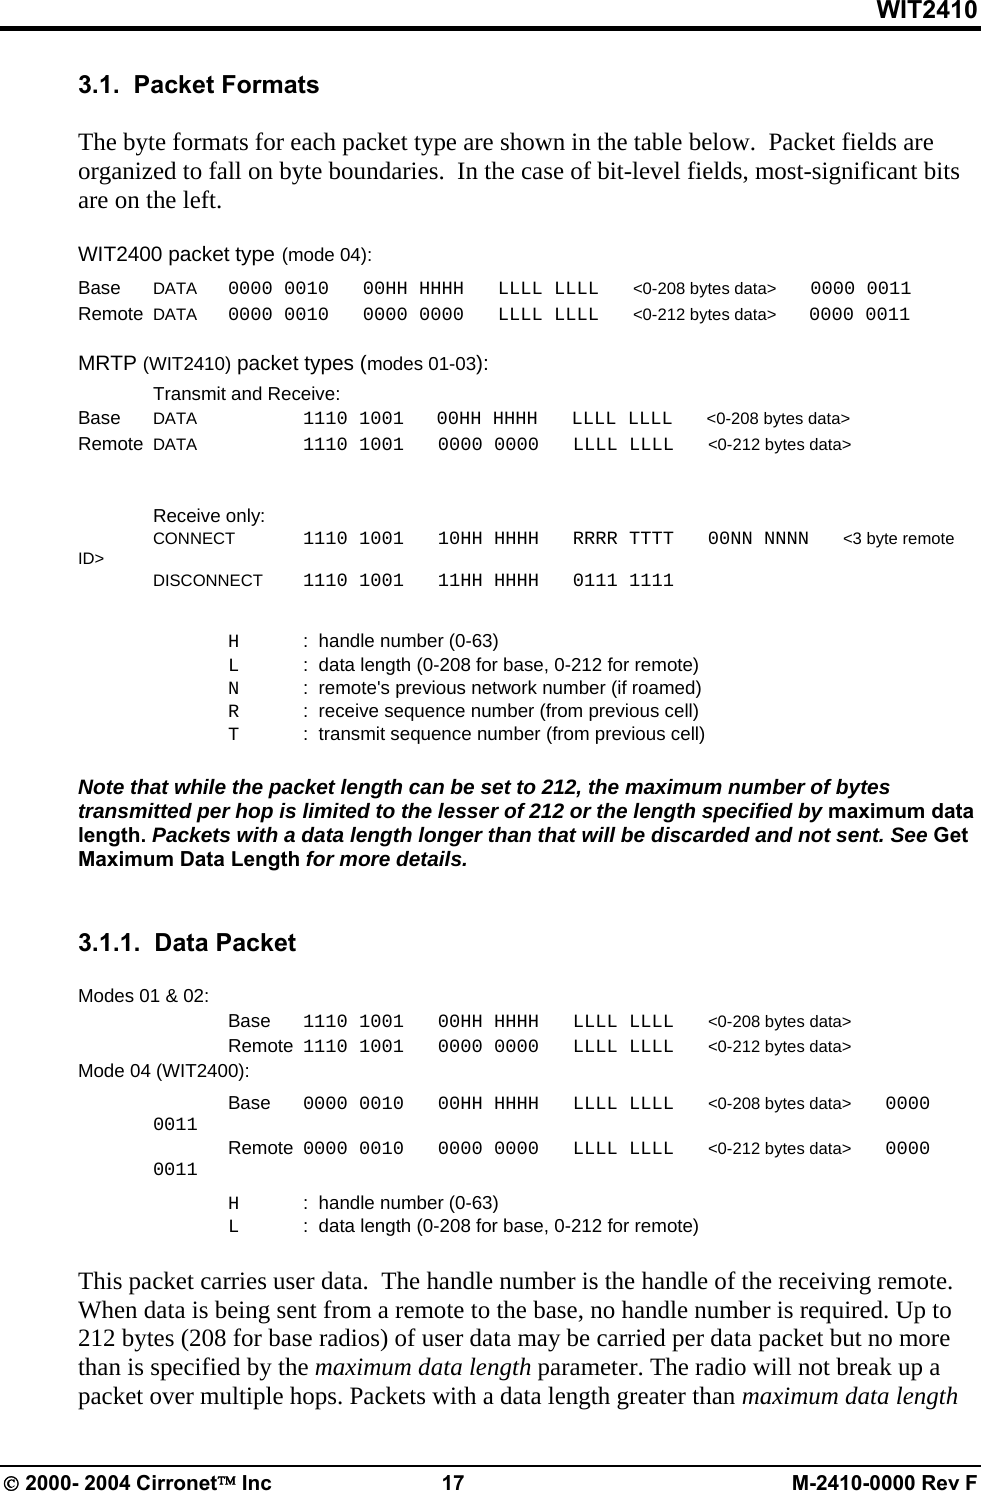 WIT2410 3.1.  Packet Formats  The byte formats for each packet type are shown in the table below.  Packet fields are organized to fall on byte boundaries.  In the case of bit-level fields, most-significant bits are on the left.  WIT2400 packet type (mode 04): Base  DATA  0000 0010   00HH HHHH   LLLL LLLL   &lt;0-208 bytes data&gt;   0000 0011 Remote  DATA  0000 0010   0000 0000   LLLL LLLL   &lt;0-212 bytes data&gt;   0000 0011  MRTP (WIT2410) packet types (modes 01-03):   Transmit and Receive: Base DATA    1110 1001       00HH HHHH   LLLL LLLL   &lt;0-208 bytes data&gt; Remote  DATA   1110 1001   0000 0000   LLLL LLLL   &lt;0-212 bytes data&gt;    Receive only:  CONNECT  1110 1001   10HH HHHH   RRRR TTTT   00NN NNNN   &lt;3 byte remote ID&gt;    DISCONNECT  1110 1001   11HH HHHH   0111 1111        H  :  handle number (0-63)   L   :  data length (0-208 for base, 0-212 for remote)   N  :  remote&apos;s previous network number (if roamed)   R  :  receive sequence number (from previous cell)   T  :  transmit sequence number (from previous cell)  Note that while the packet length can be set to 212, the maximum number of bytes transmitted per hop is limited to the lesser of 212 or the length specified by maximum data length. Packets with a data length longer than that will be discarded and not sent. See Get Maximum Data Length for more details.   3.1.1.  Data Packet    Modes 01 &amp; 02:  Base 1110 1001   00HH HHHH   LLLL LLLL   &lt;0-208 bytes data&gt;   Remote  1110 1001   0000 0000   LLLL LLLL   &lt;0-212 bytes data&gt; Mode 04 (WIT2400):  Base 0000 0010   00HH HHHH   LLLL LLLL   &lt;0-208 bytes data&gt;   0000 0011 Remote  0000 0010   0000 0000   LLLL LLLL   &lt;0-212 bytes data&gt;   0000 0011   H  :  handle number (0-63)   L   :  data length (0-208 for base, 0-212 for remote)  This packet carries user data.  The handle number is the handle of the receiving remote. When data is being sent from a remote to the base, no handle number is required. Up to 212 bytes (208 for base radios) of user data may be carried per data packet but no more than is specified by the maximum data length parameter. The radio will not break up a packet over multiple hops. Packets with a data length greater than maximum data length © 2000- 2004 Cirronet™ Inc  17  M-2410-0000 Rev F 